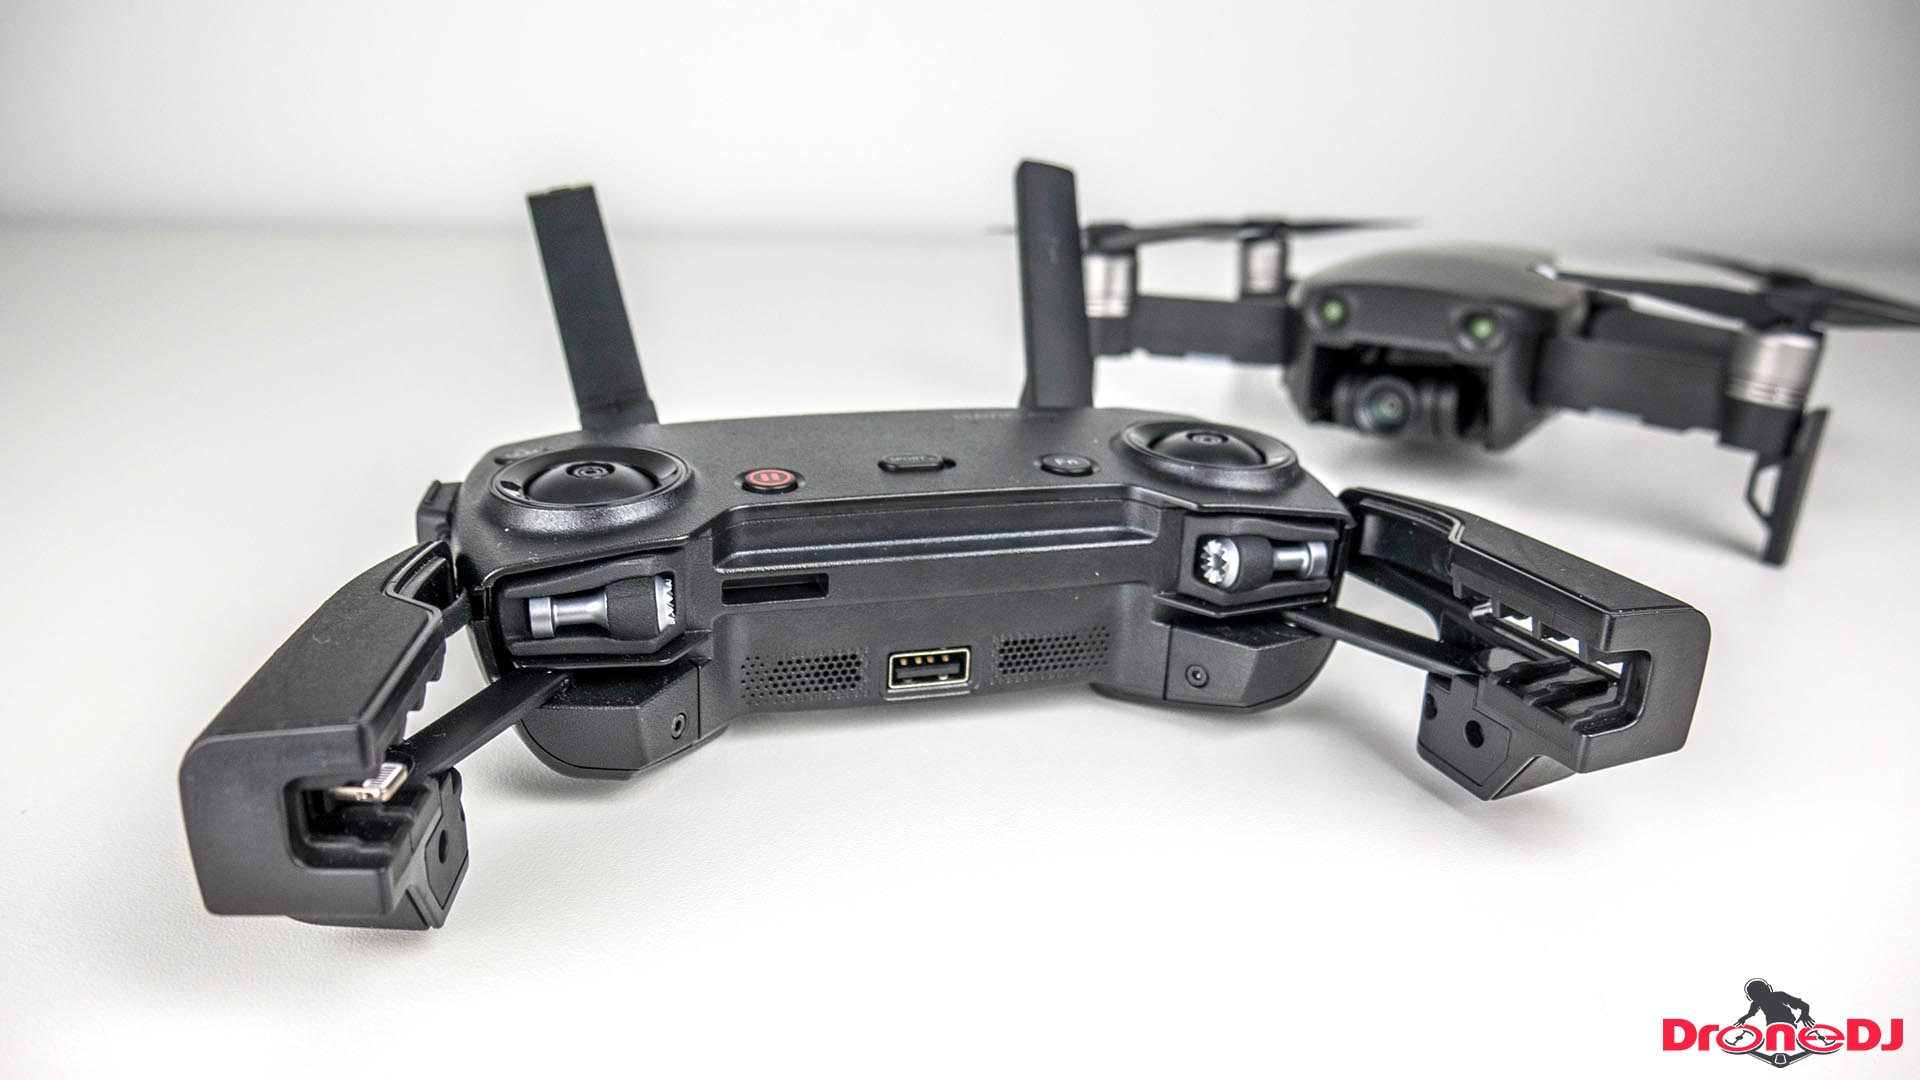 The DJI Mavic Air is almost perfect (6 month review)